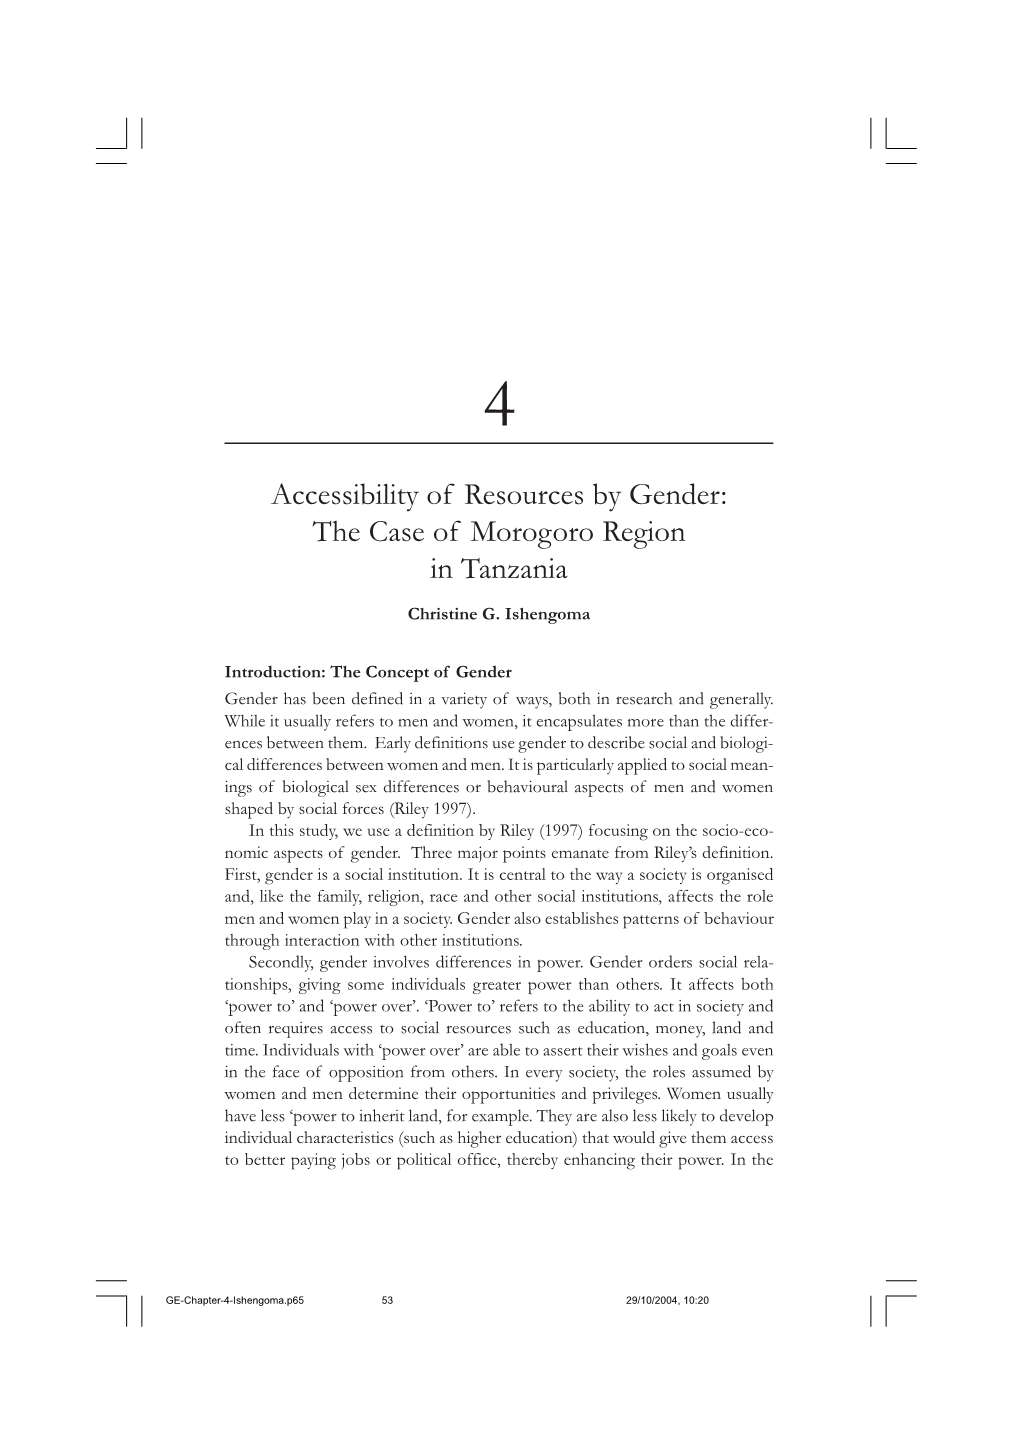 Accessibility of Resources by Gender: the Case of Morogoro Region in Tanzania